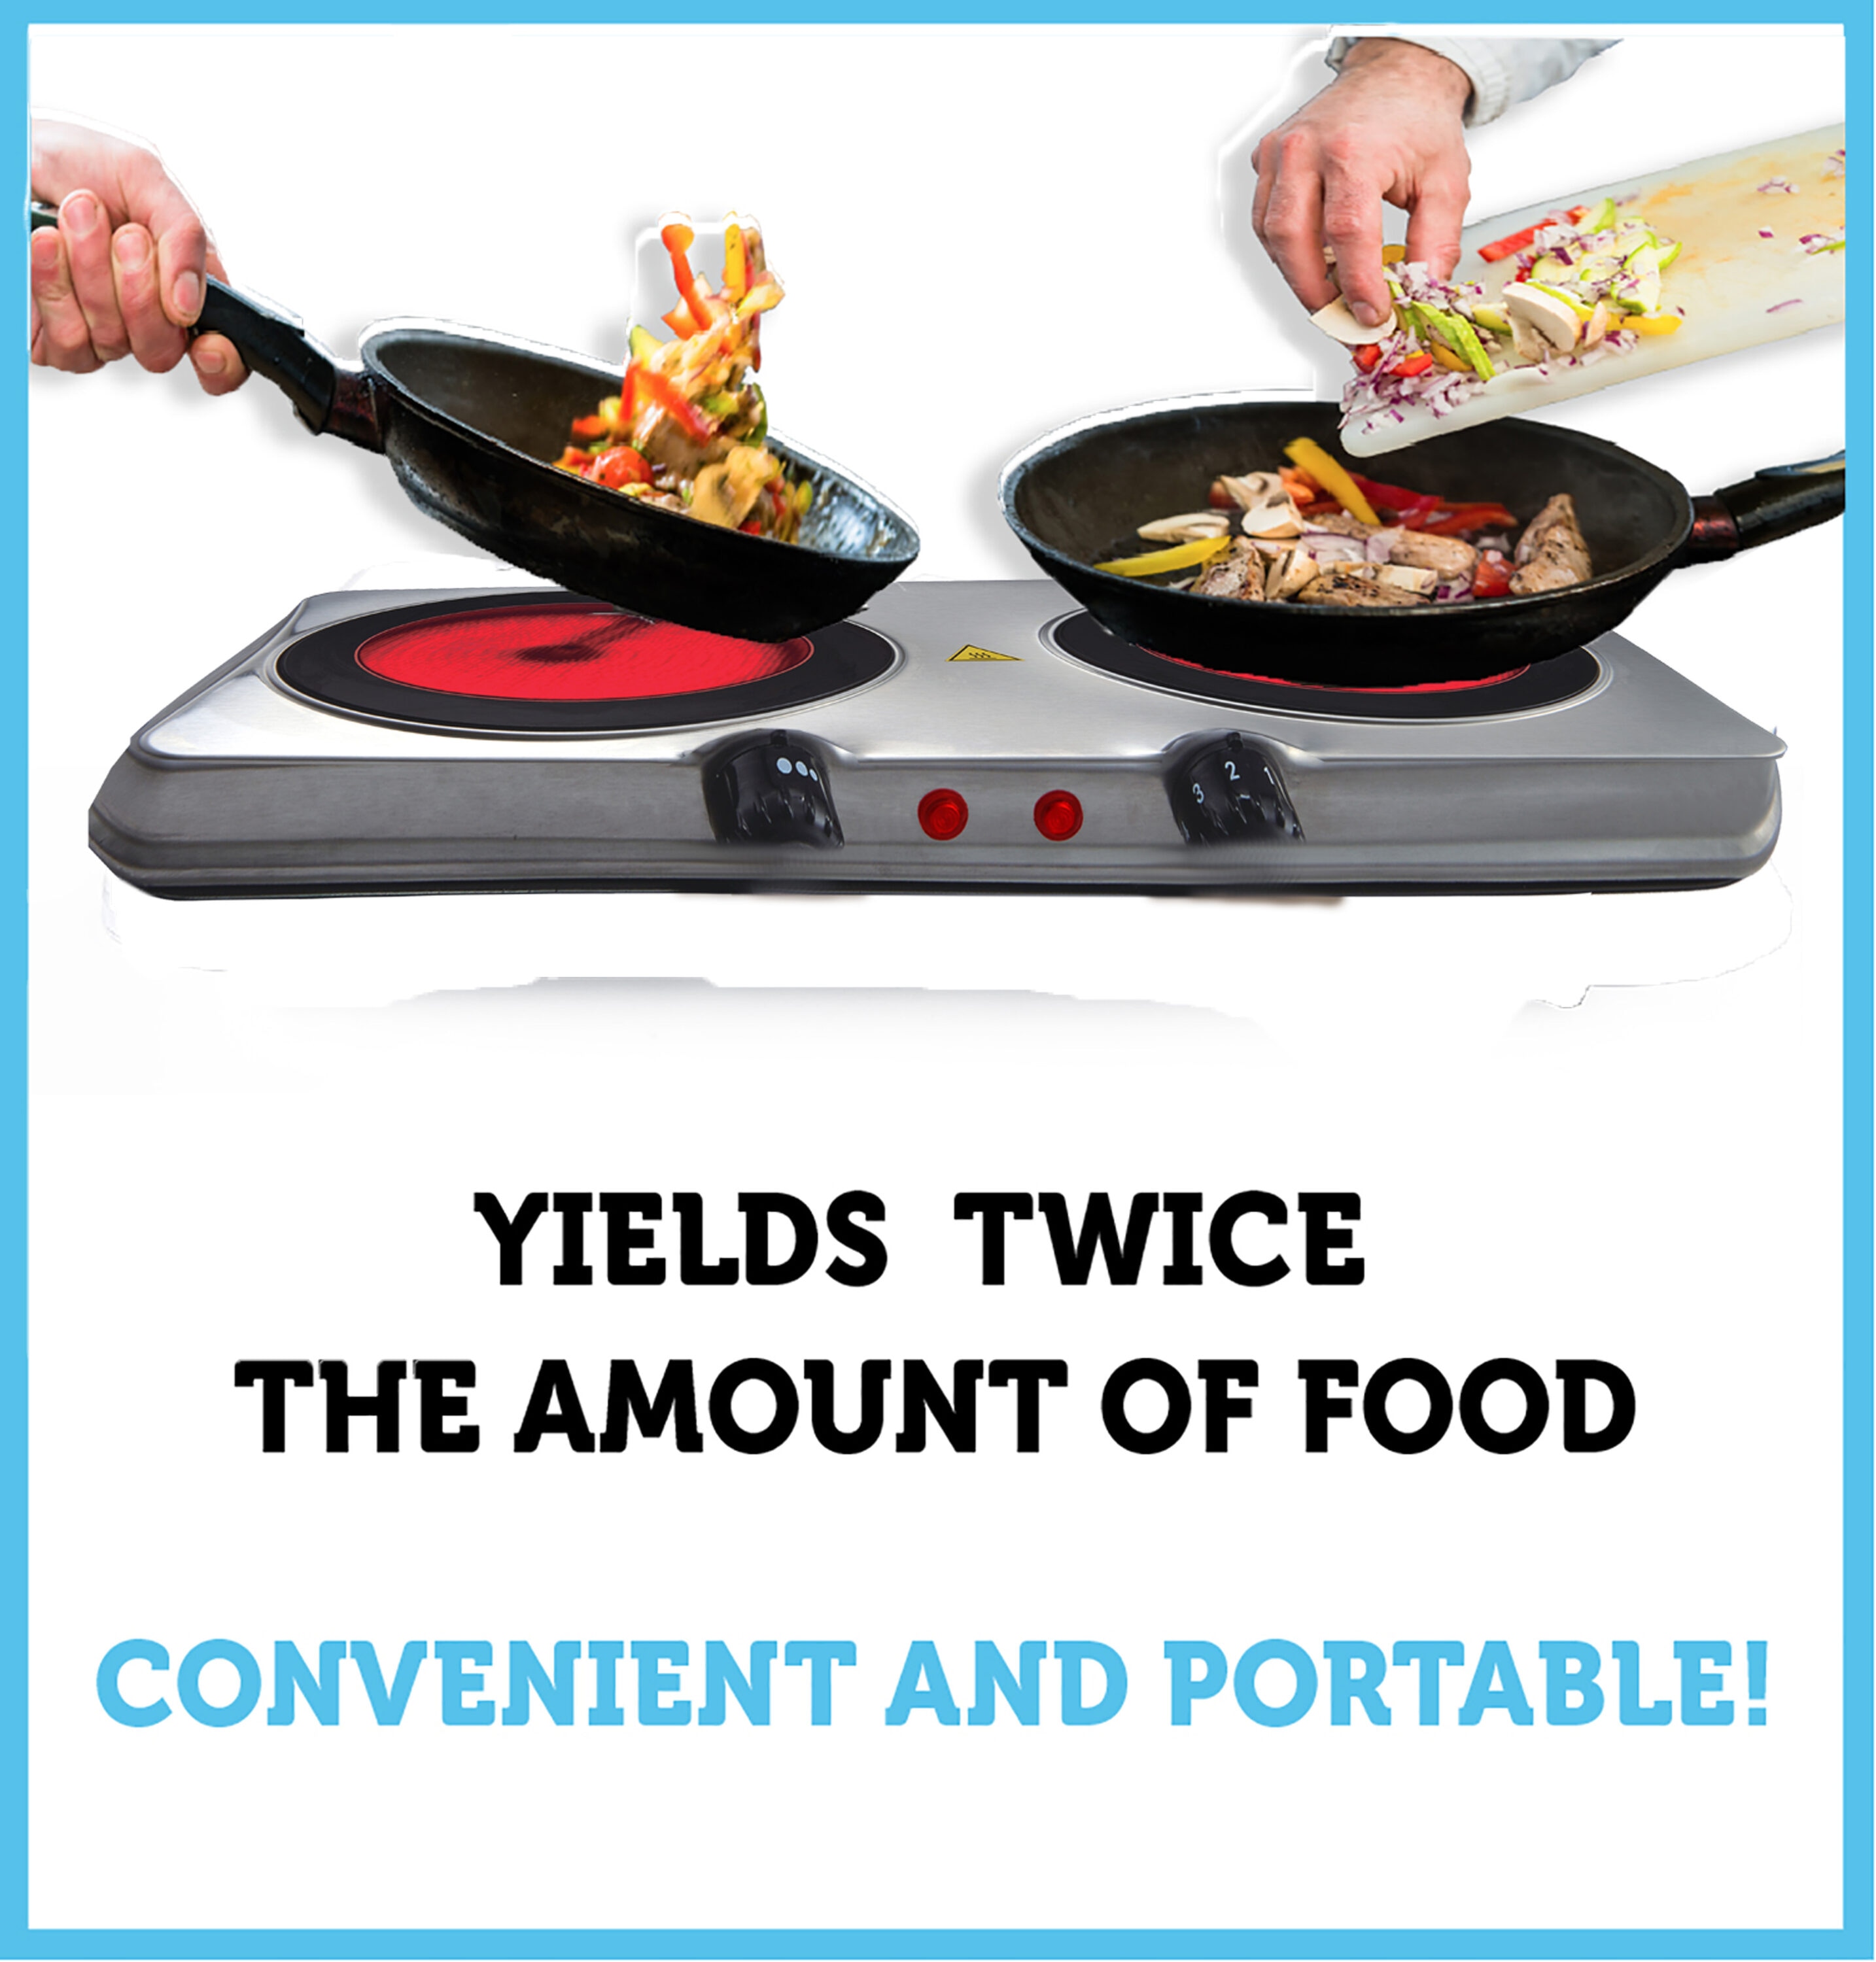 Electric Stovetop Cooking Hot Plate 1200W Infrared 7.3/4 Glass Ceramic  Portable Stove Burners Cool Touch Handle Single Cooktop Keeps Food Warm